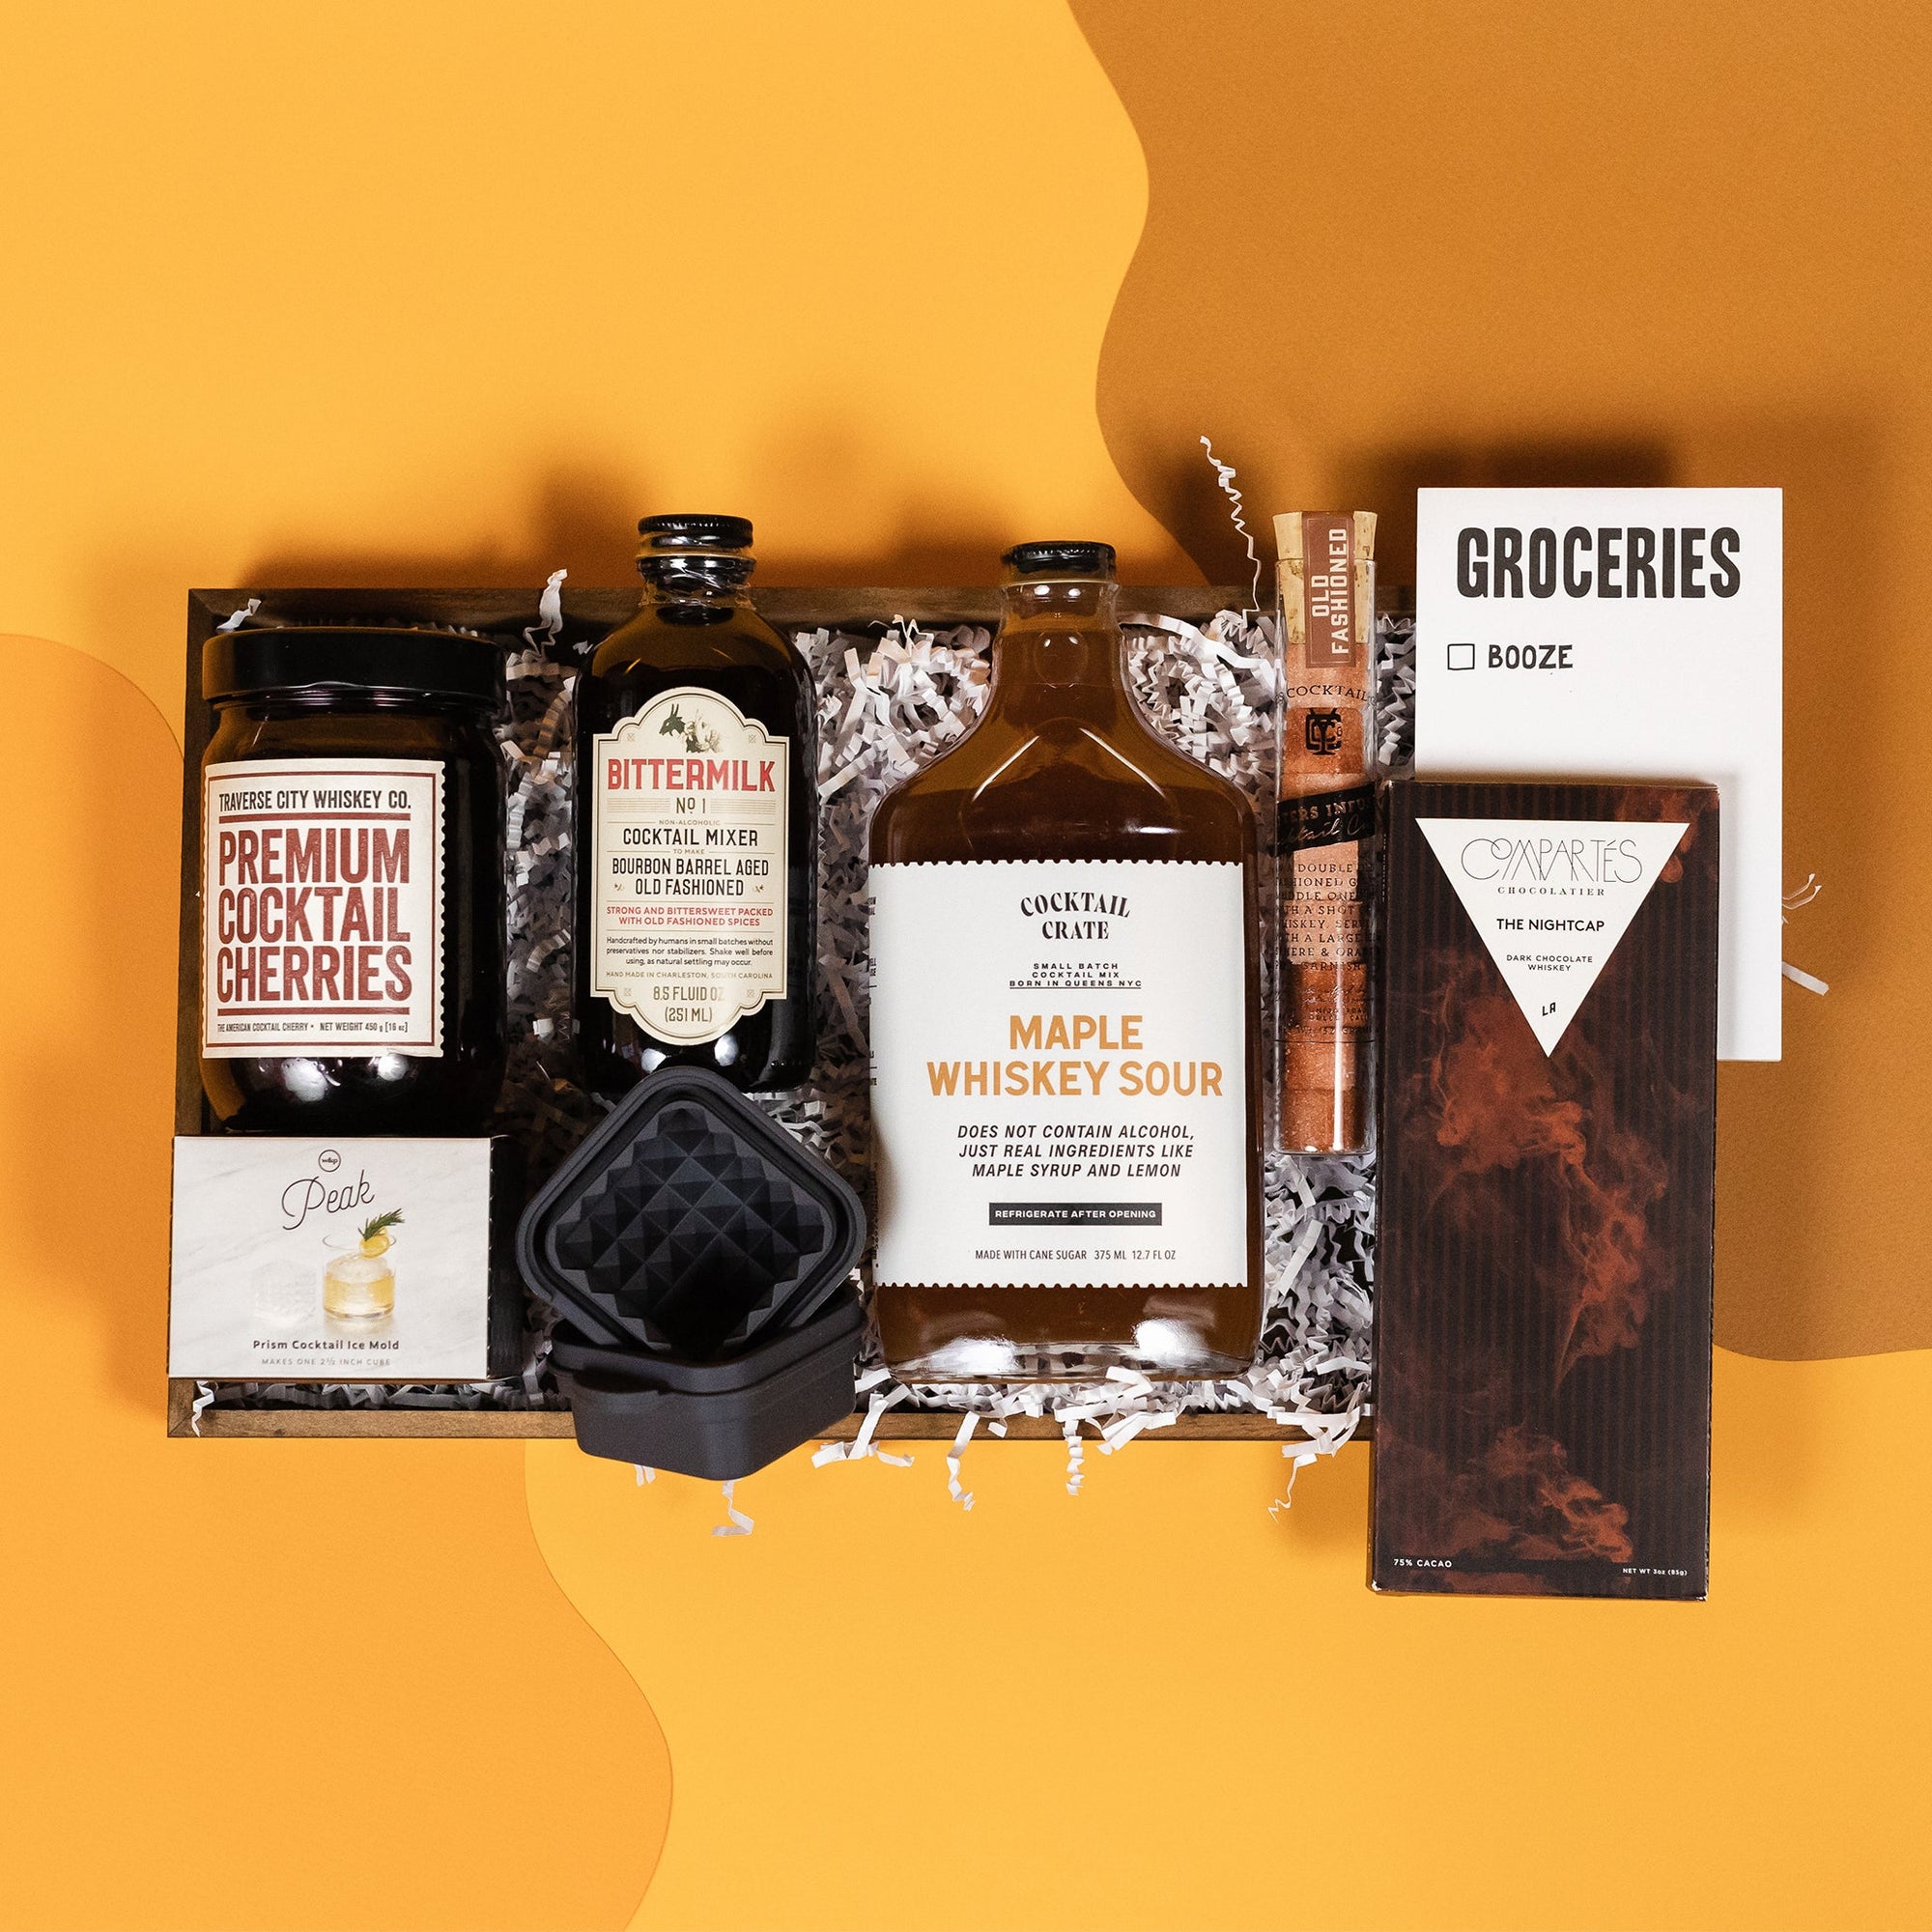 On a retro mustard yellow and ochre background sits a wooden tray of whiskey-themed gifts with white paper krinkle. The gifts include a small bottle of Bittermilk Bourbon Barrel Aged Old Fashioned cocktail mix, Cocktail Crate Maple Whiskey Sour mixer, a Peak Prism Cockail Ice Mold, Traverse City Whiskey Co. Premium Cocktail Cherries, YES Cocktail Co. Old Fashioned Sugar Cubes, a "GROCERIES" notepad with one checkbox for Booze, and a premium Compartes 'The Nightcap' Dark Chocolate Whiskey Bar. 